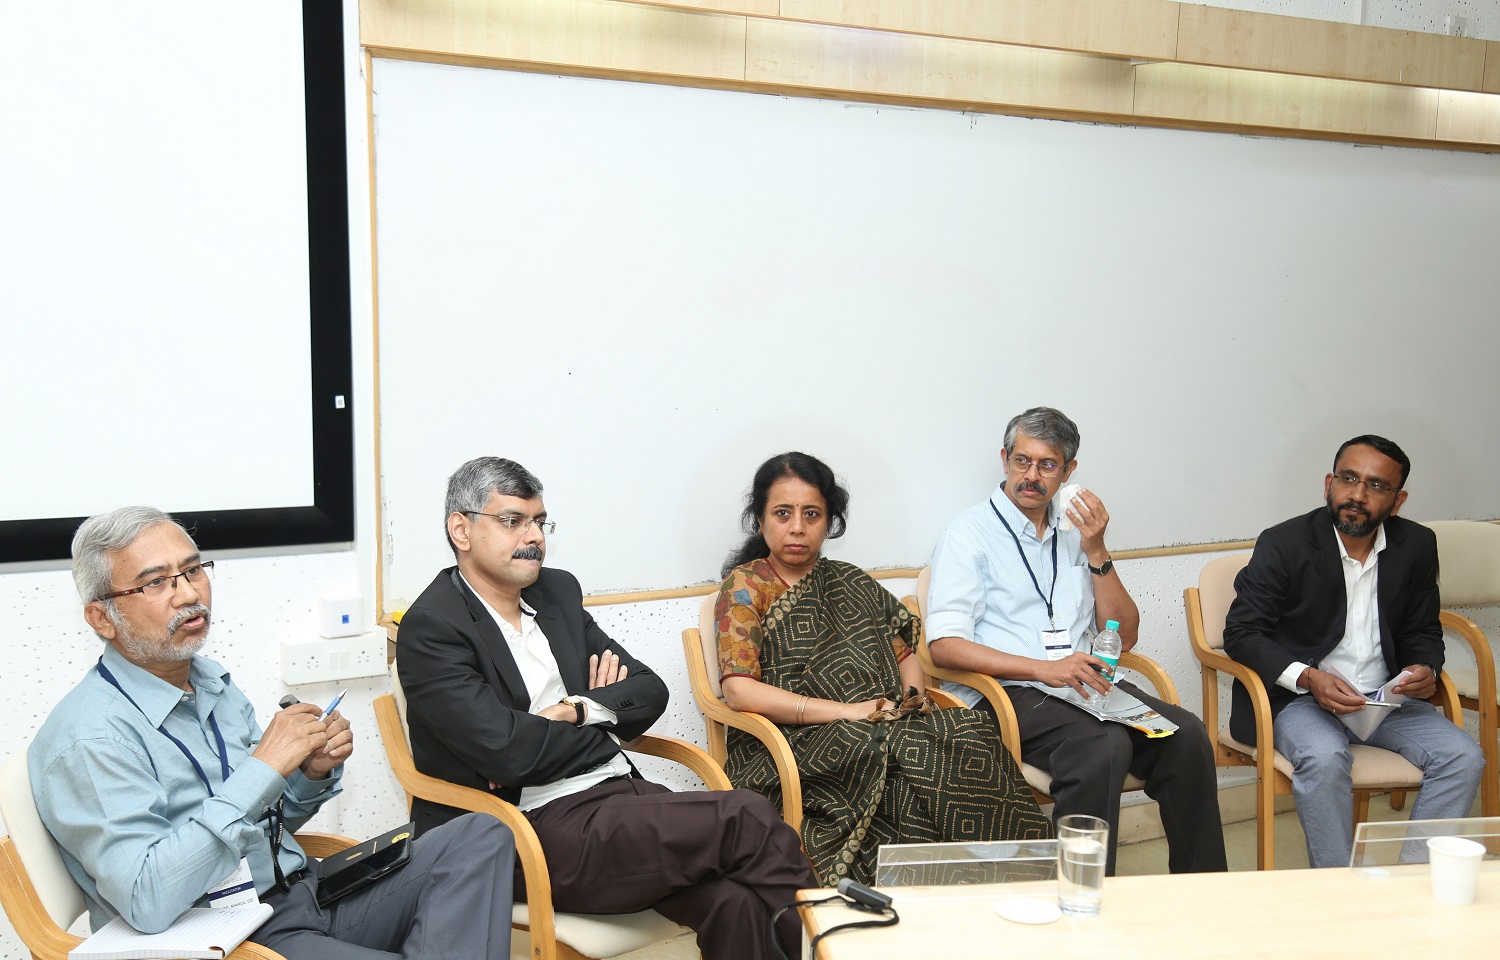 Prof. Rahul Dé, Dean, Programmes and faculty in the Information Systems area, IIM Bangalore moderated the panel discussion on ‘Digital Fluency: Rethinking IS in the Management Curriculum’. (L-R) Prof. Rahul Dé; Prof. Rejie George Pallathitta, faculty from the Strategy area, IIM Bangalore; Dr. Nandini S, Senior VP, HR & Organizational Development, Infosys; Prof. Raghav Rao, IS area, University of Texas, San Antonio and Amit Nigam, VP, Products, RedBus.